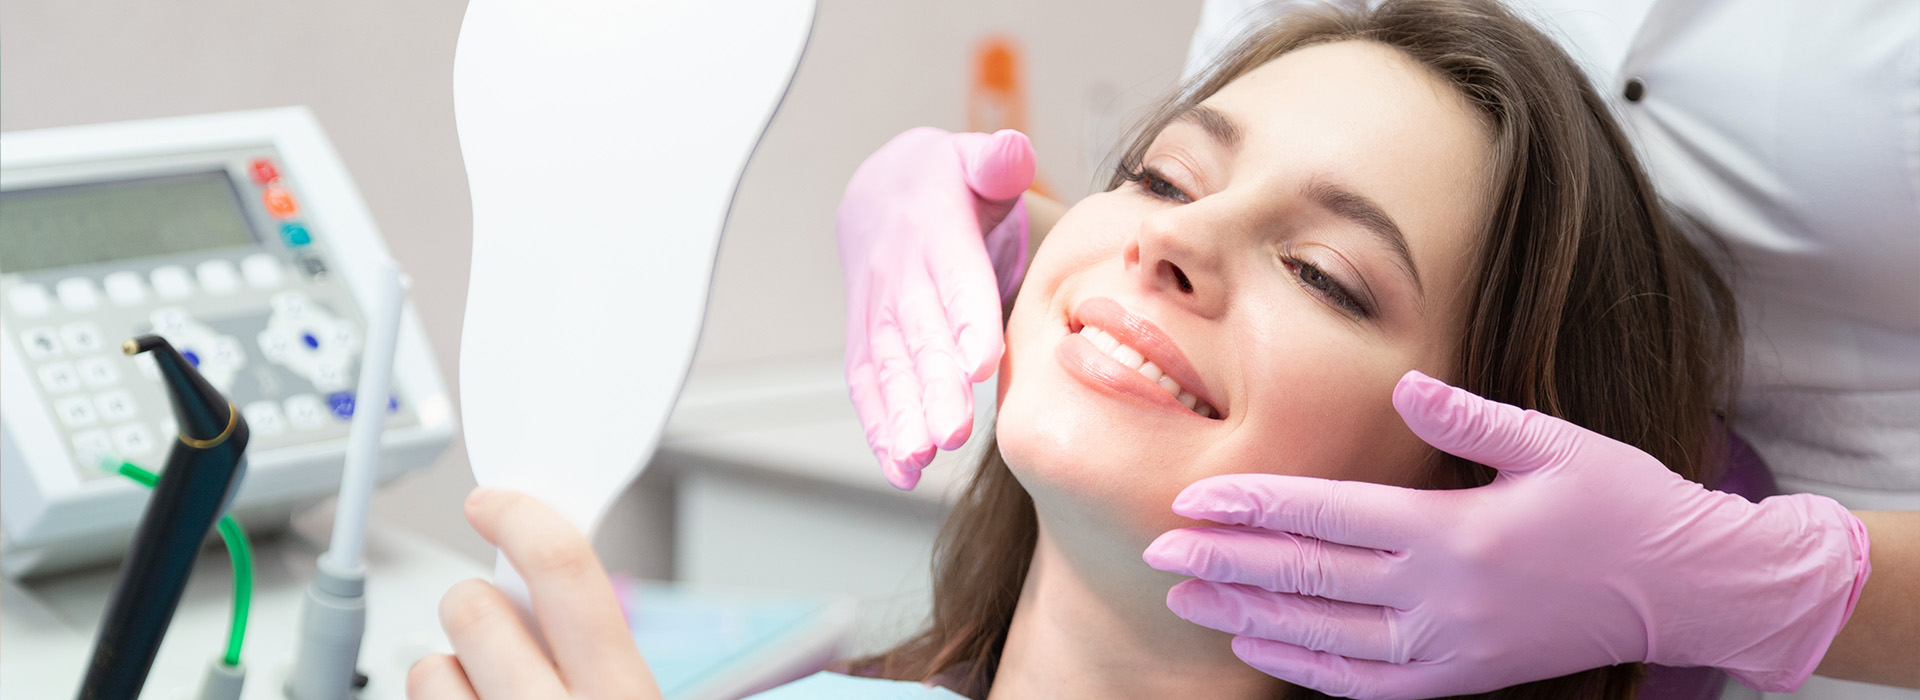 Village Dental | Nitrous Oxide, Emergency Treatment and Root Canals